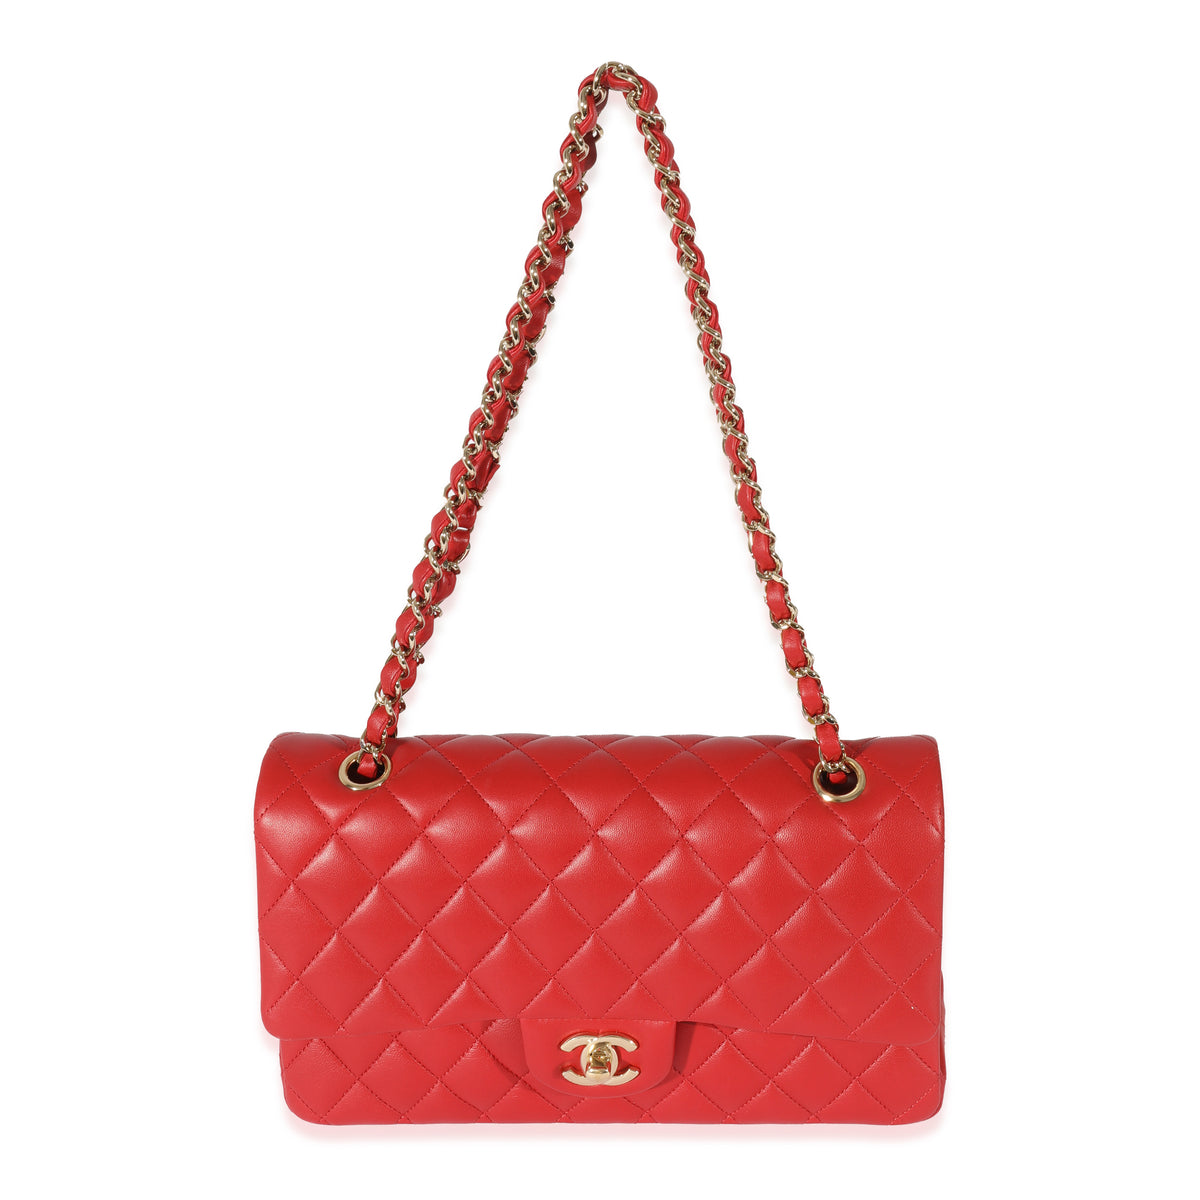 Chanel Red Quilted Lambskin Medium Classic Flap Bag